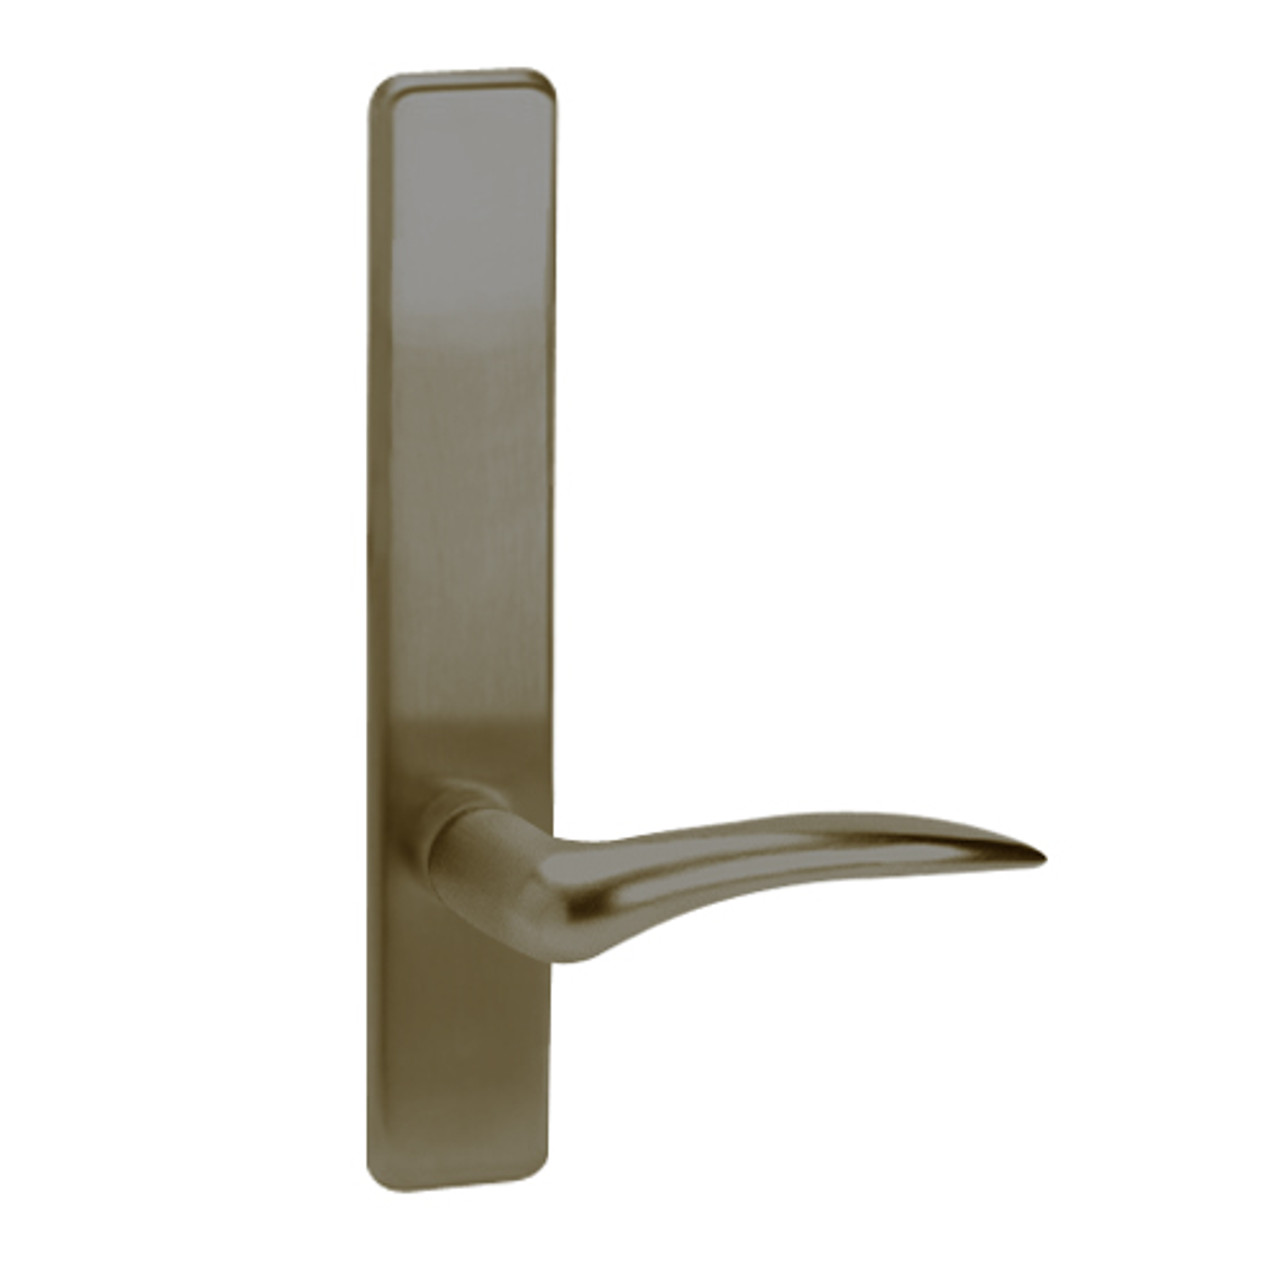 D855-613-RHR Corbin ED4000 Series Exit Device Trim with Classroom Dirke Lever in Oil Rubbed Bronze Finish